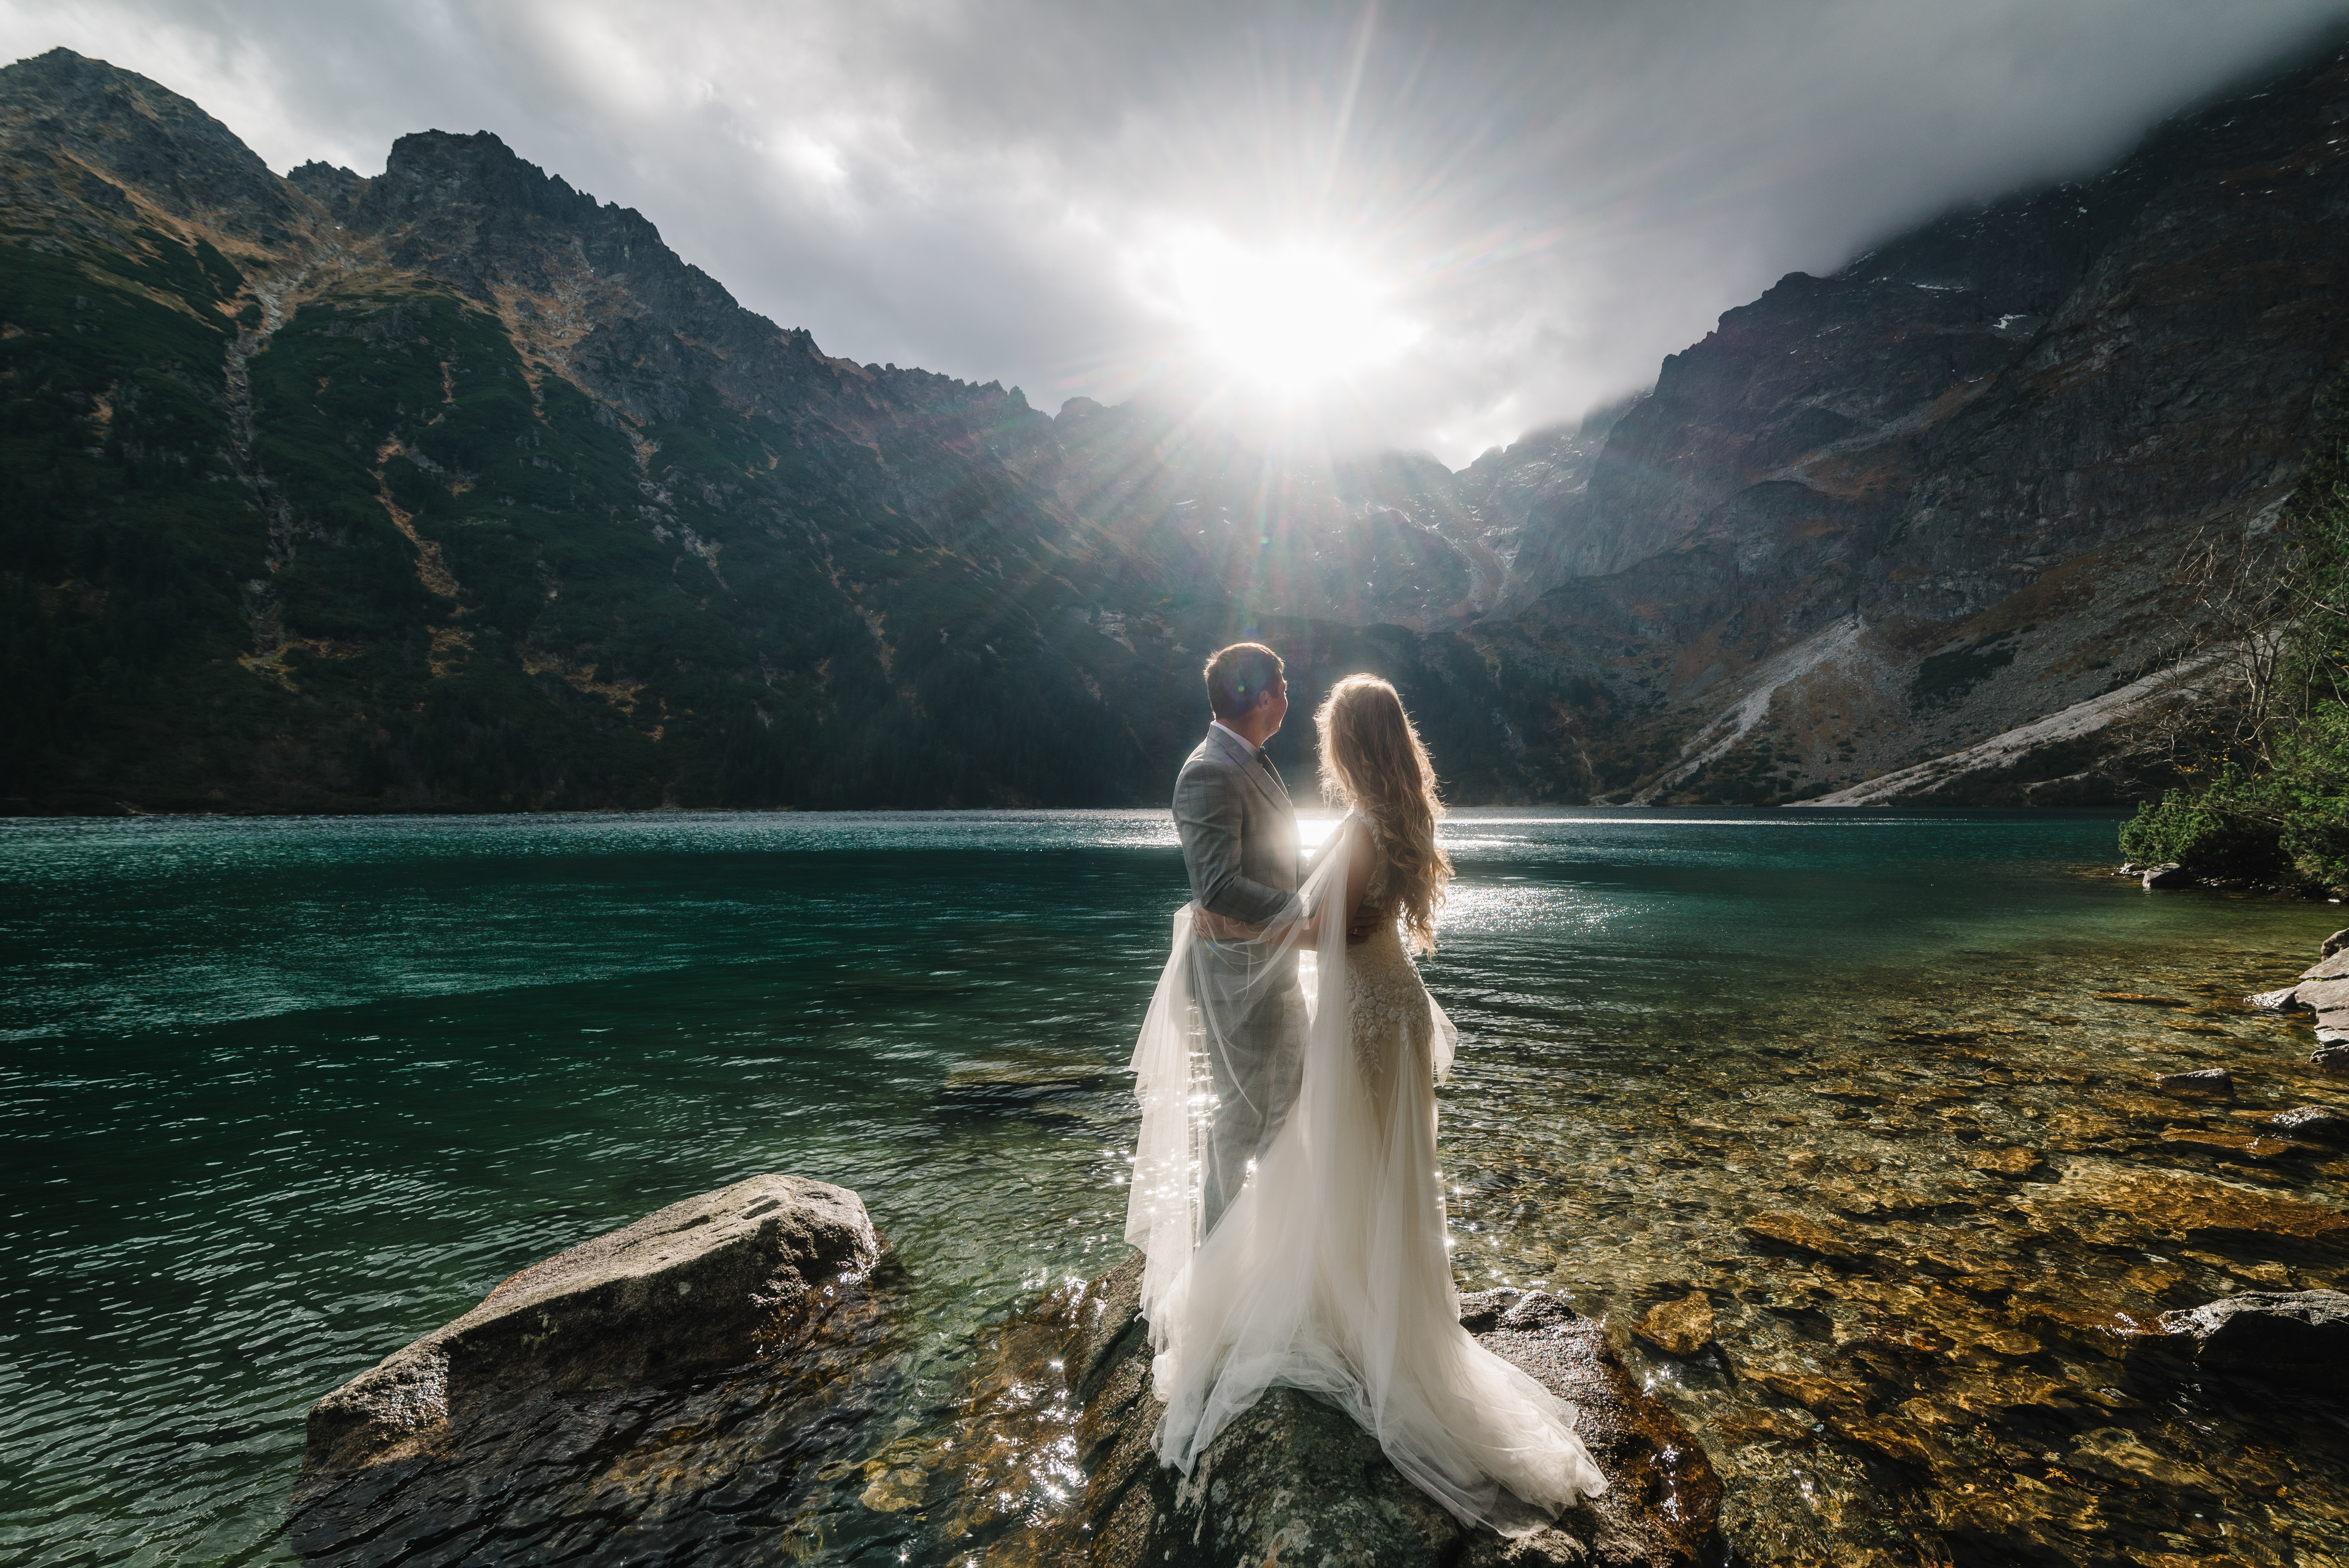 lovely couple holding each other near the lake in the mountains looking toward the sunrise